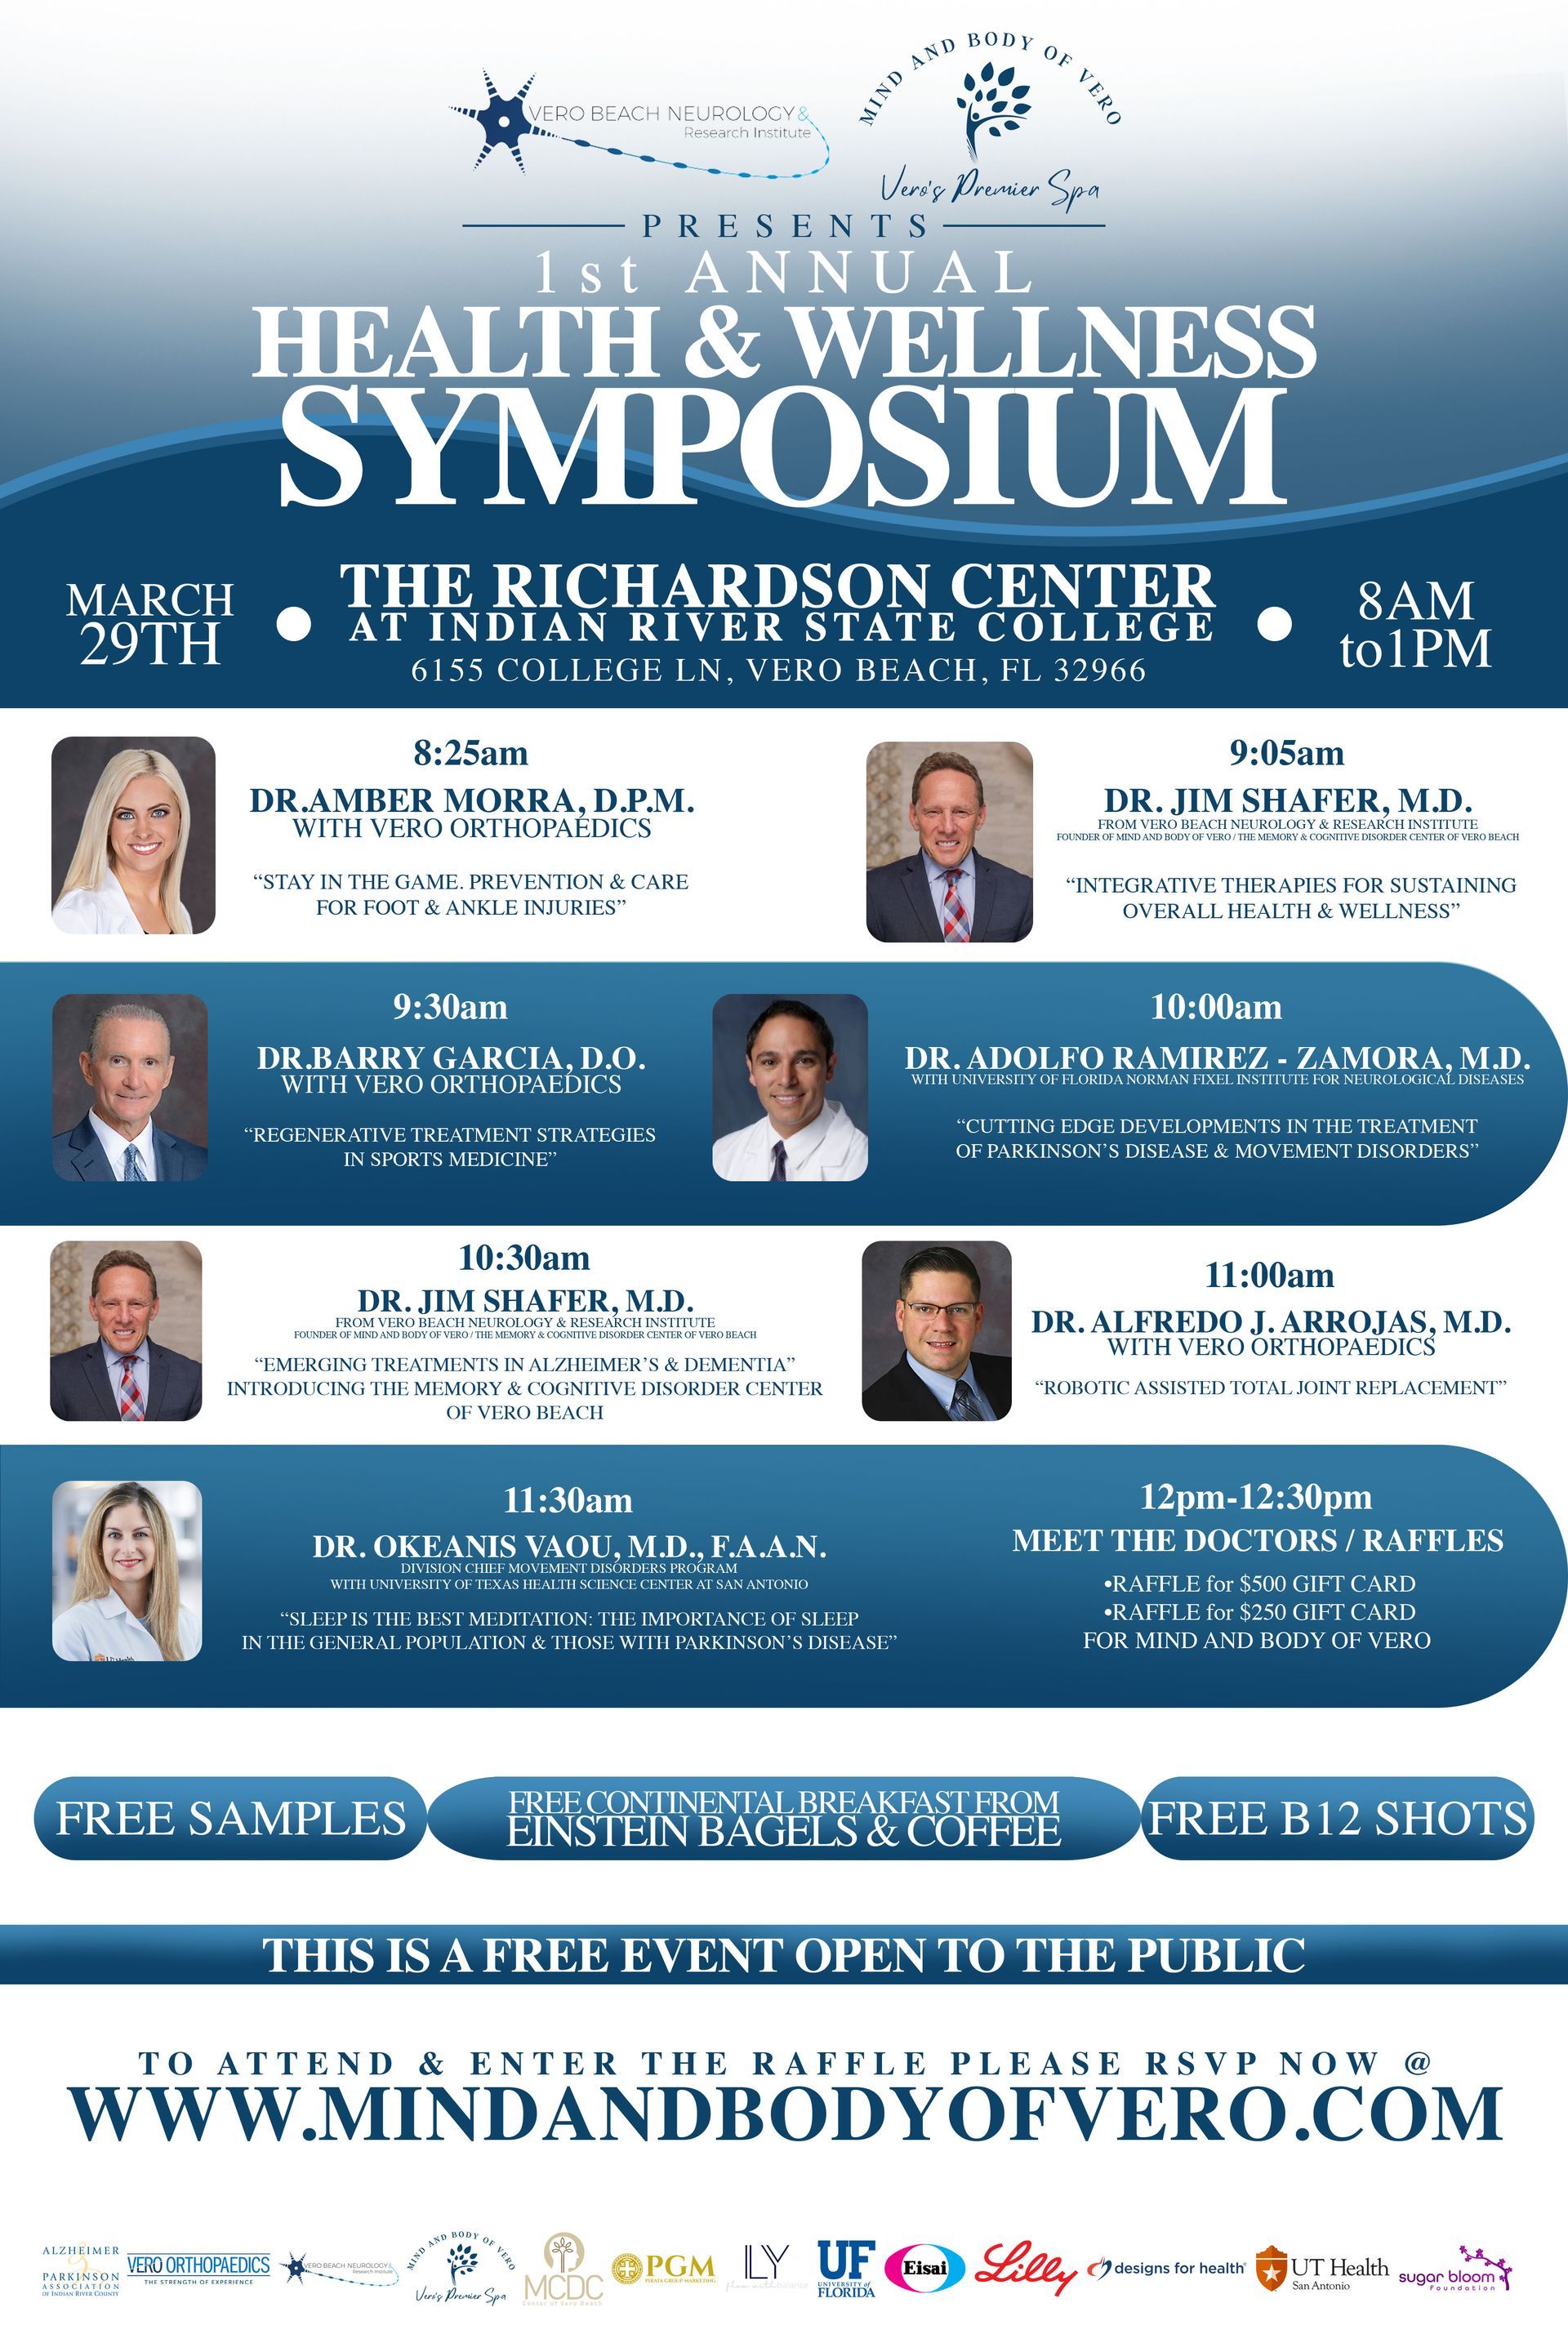 a health and wellness symposium is being held at the richardson center at indian river state college .